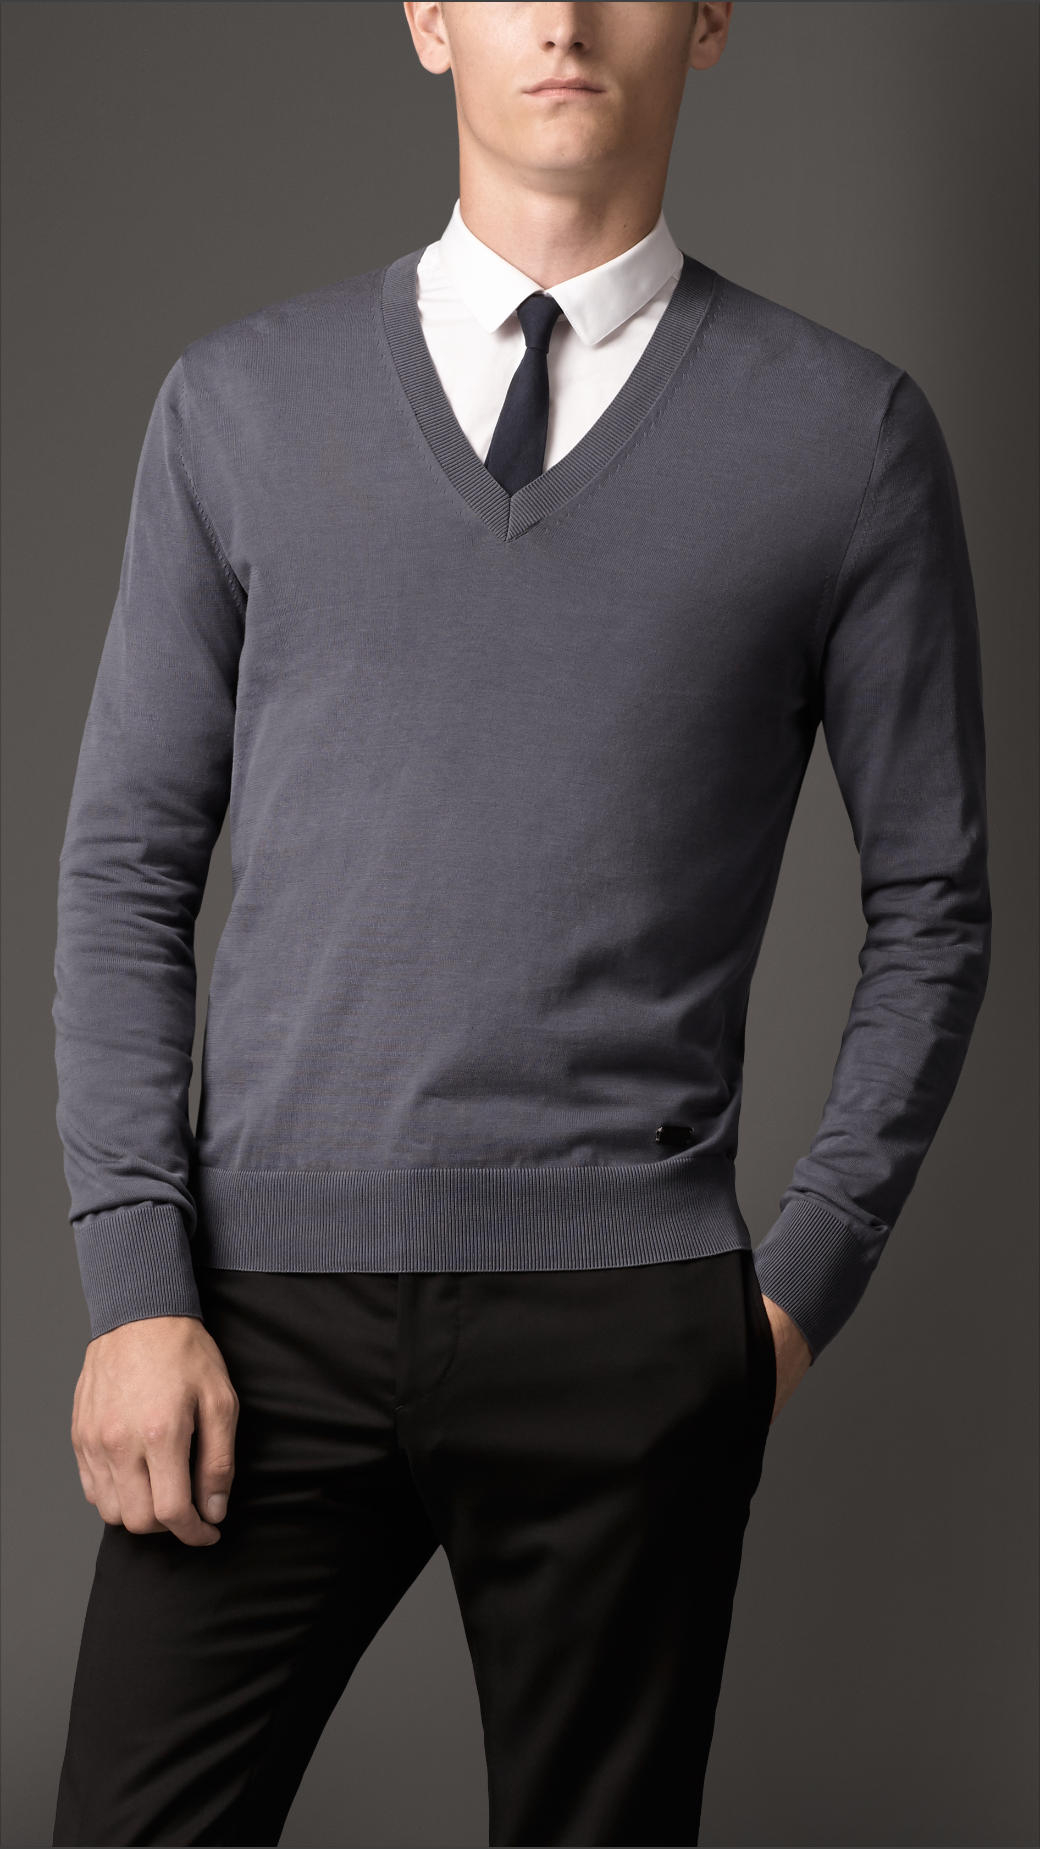 Lyst - Burberry V Neck Sea Island Cotton Sweater in Blue for Men